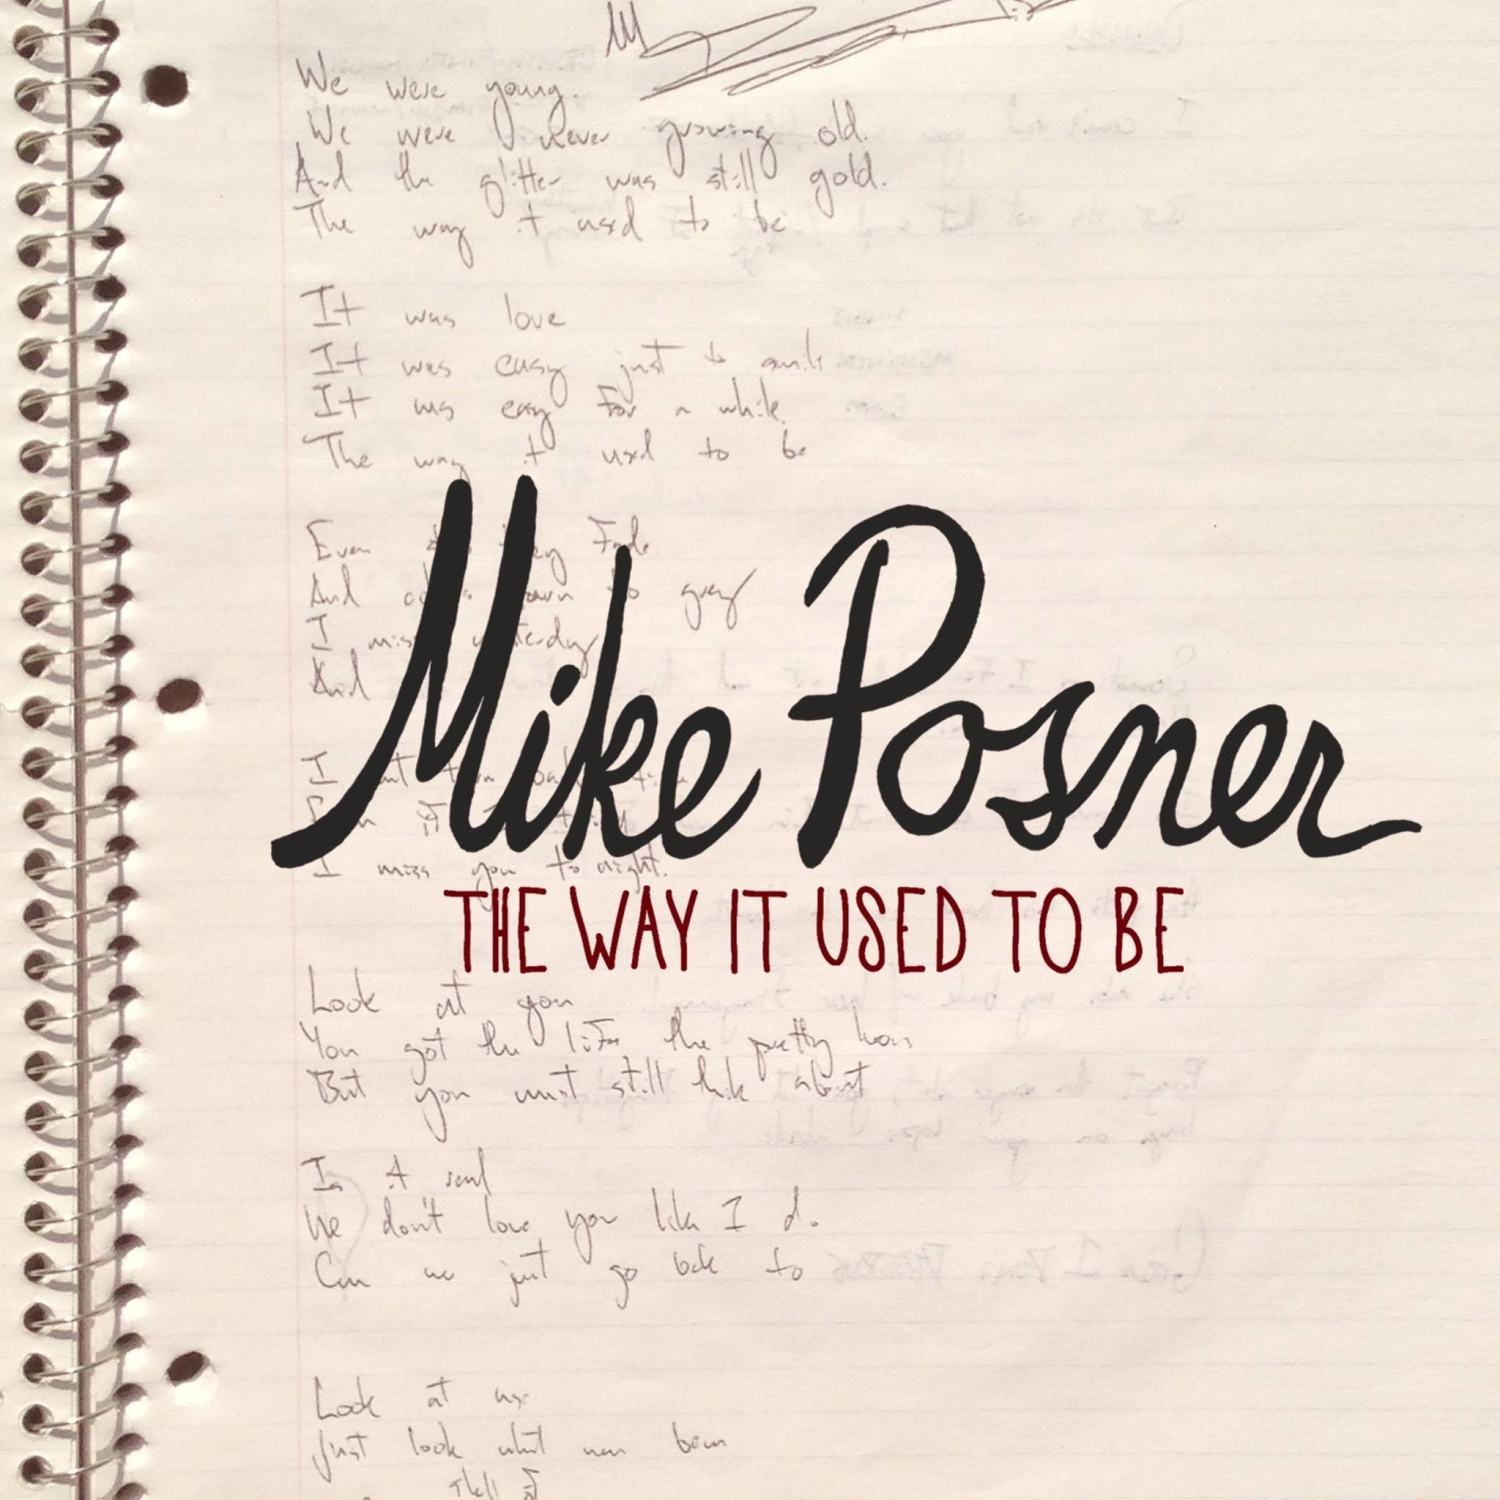 Mike Posner - The Way It Used To Be
